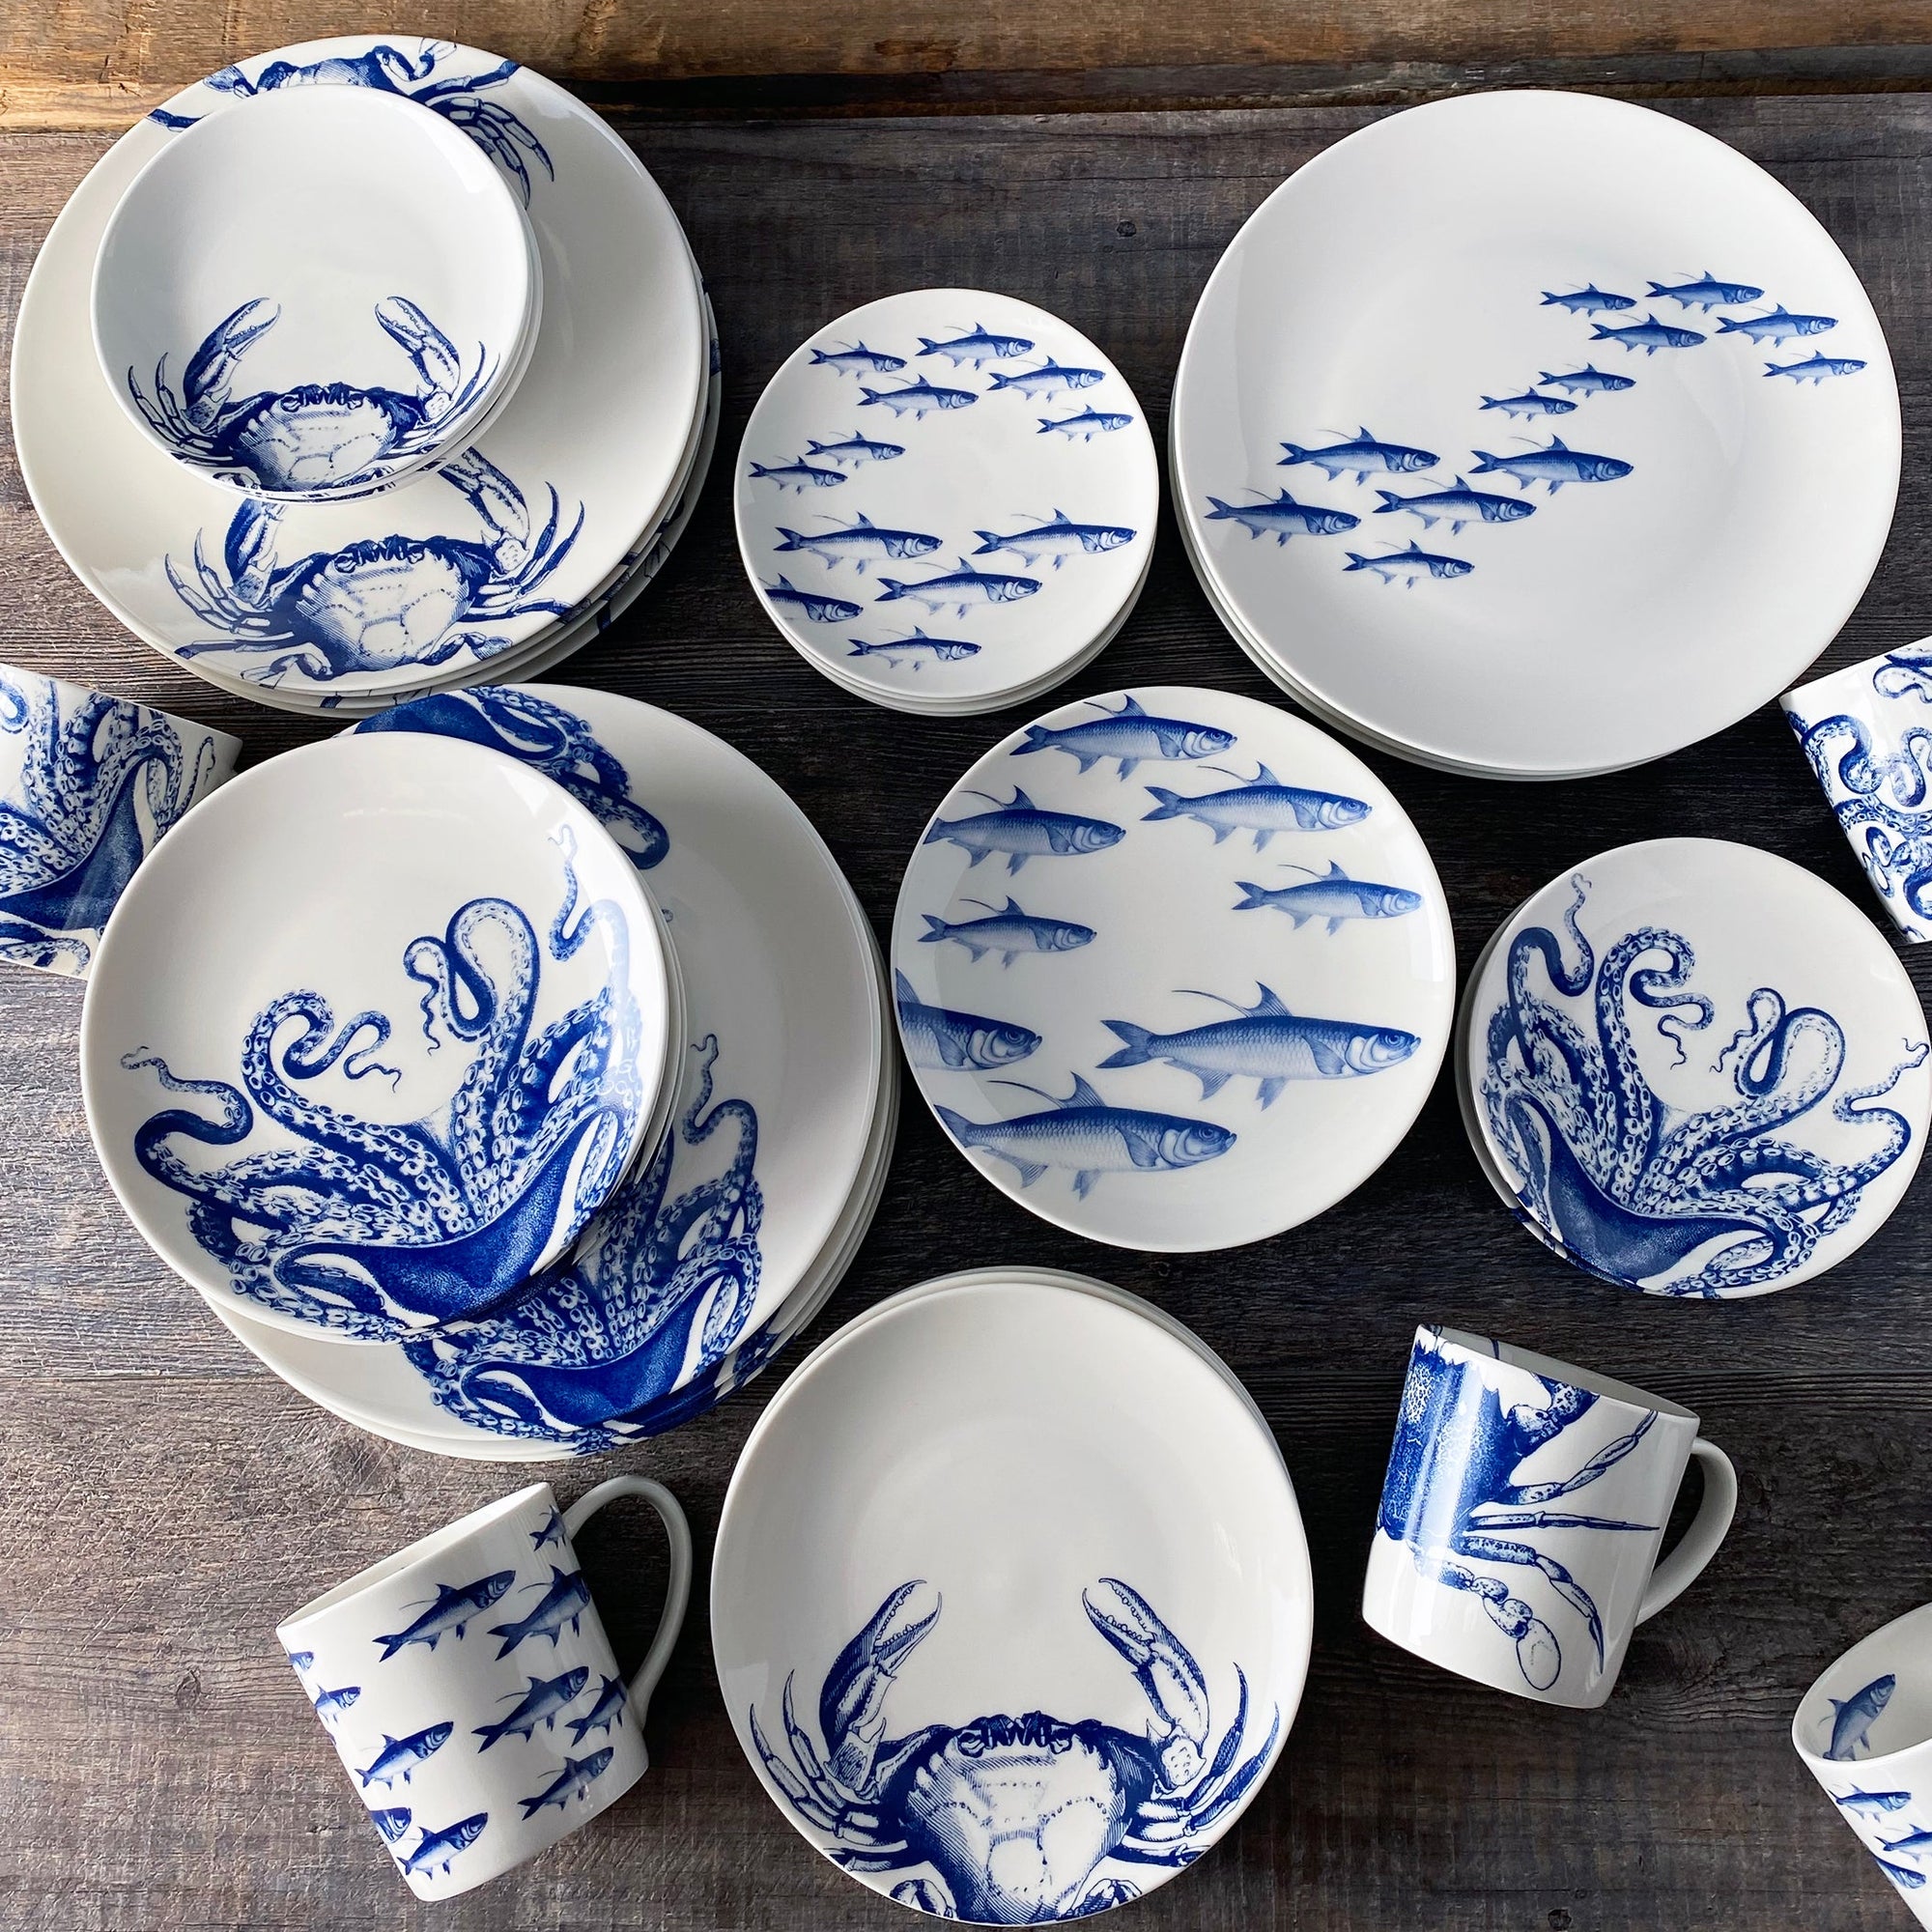 A set of blue and white plates with crabs on them.